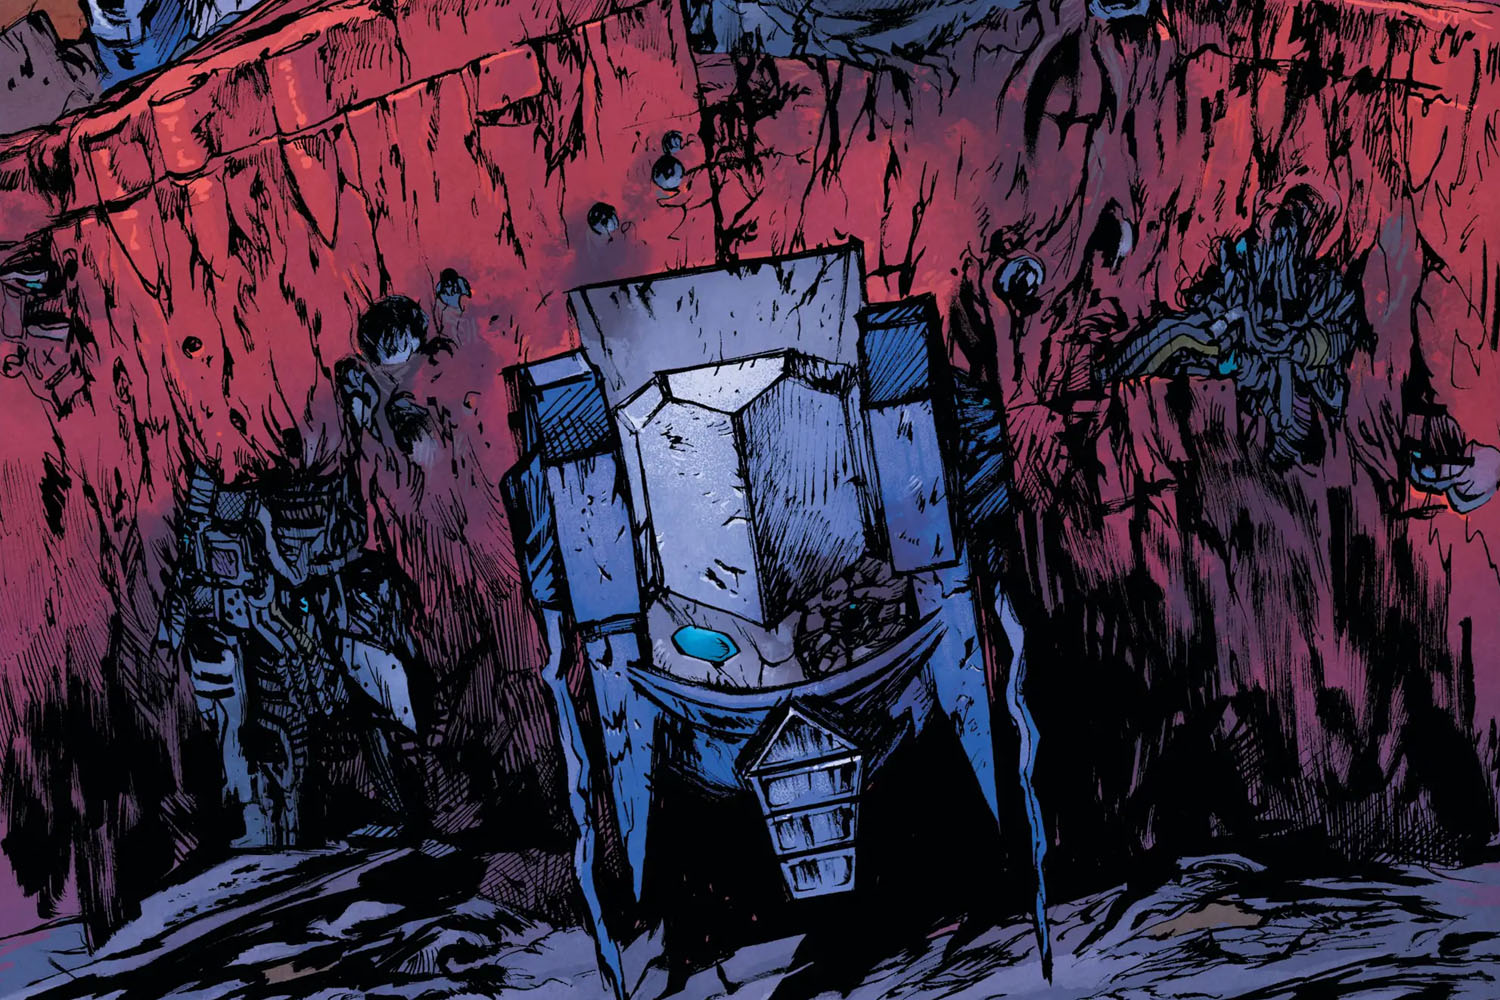 'Transformers' #6 is bonkers in the best way ever